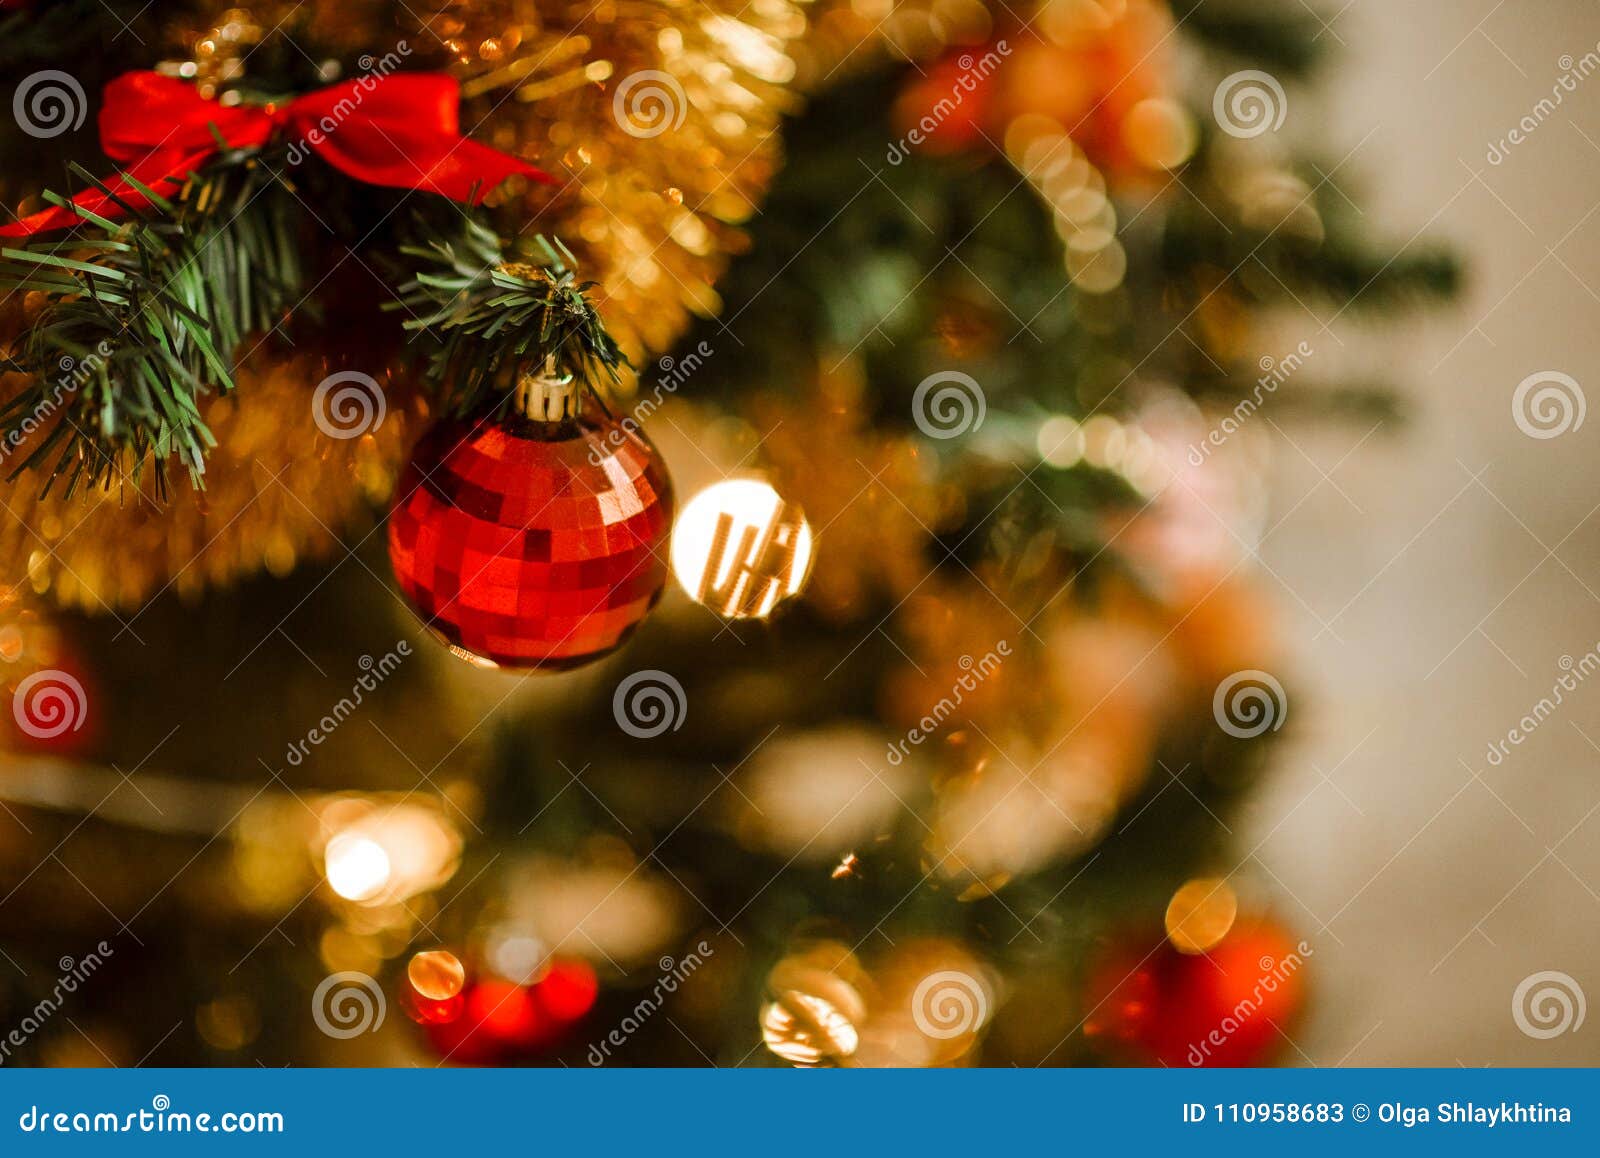 Christmas Tree Gold Decorations and Garland Stock Image - Image of ...